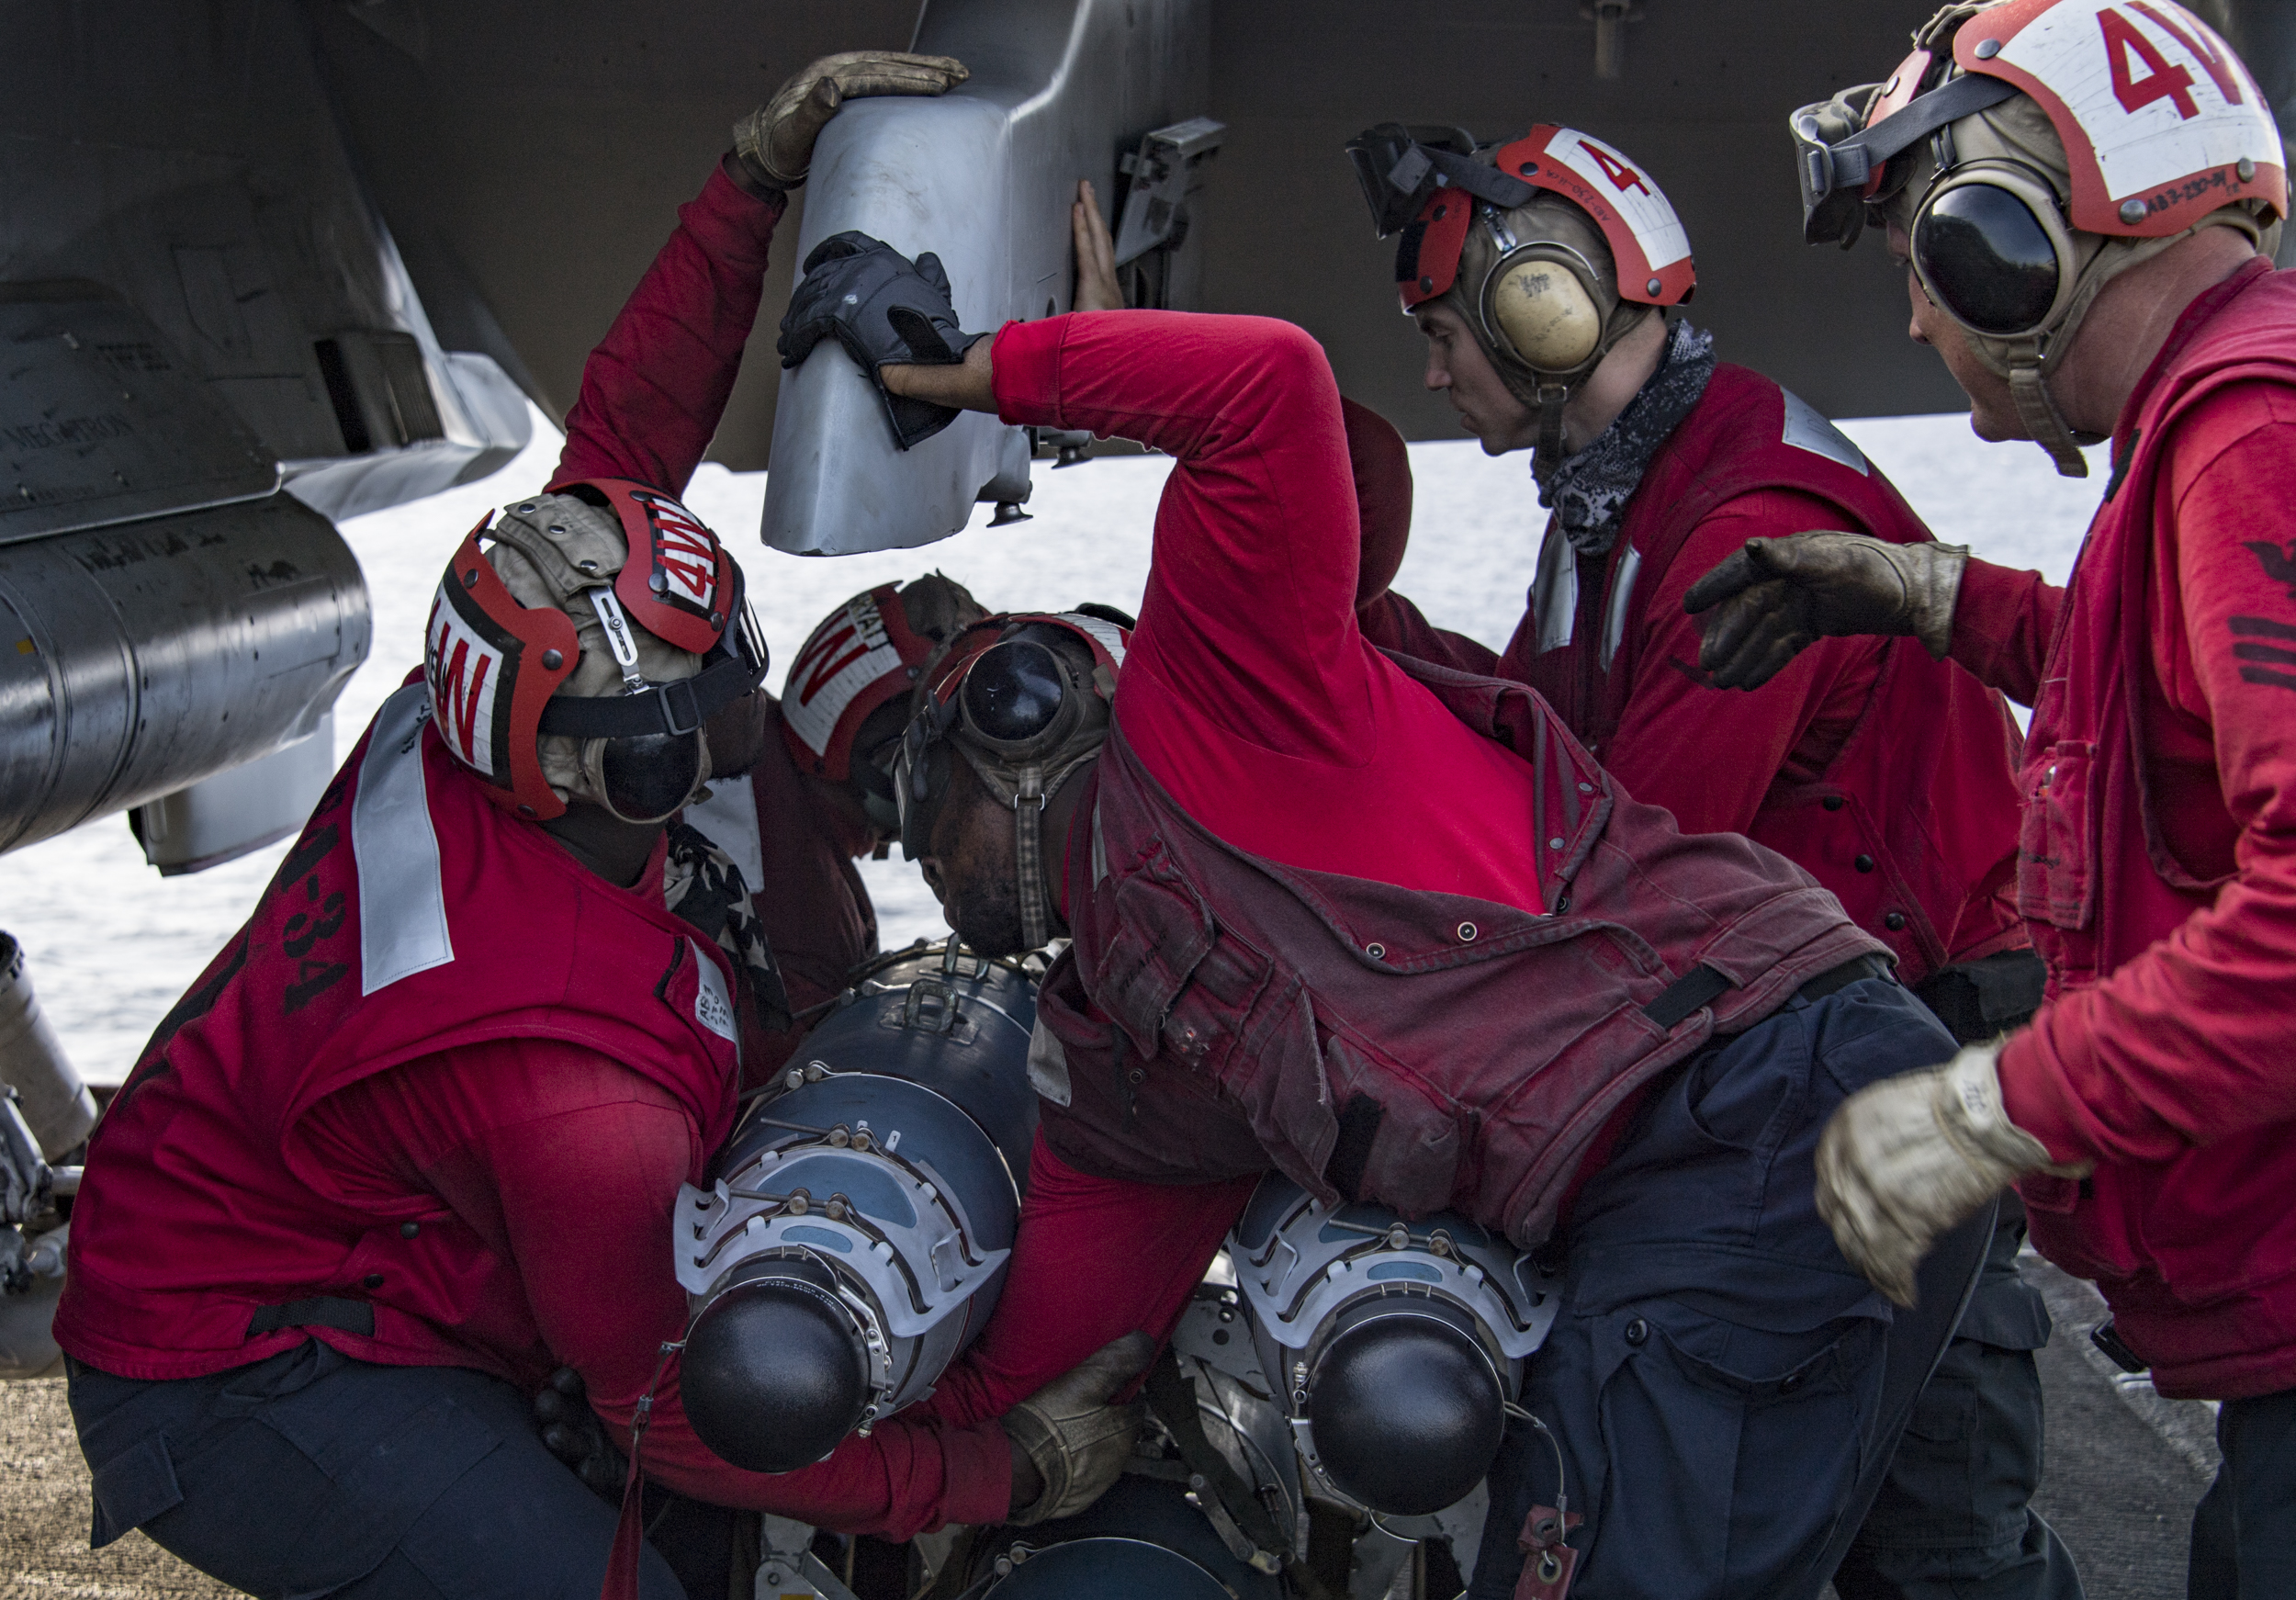 Sailors attach ordnance to an F/A-18C Hornet assigned to the “Blue Blasters” of Strike Fighter Squadron 34 on the flight deck of aircraft carrier USS Carl Vinson. The Carl Vinson Strike Group is currently operating in the Western Pacific as part of a regularly scheduled deployment. (U.S. Navy photo by Mass Communication Specialist 3rd Class Dylan M. Kinee)